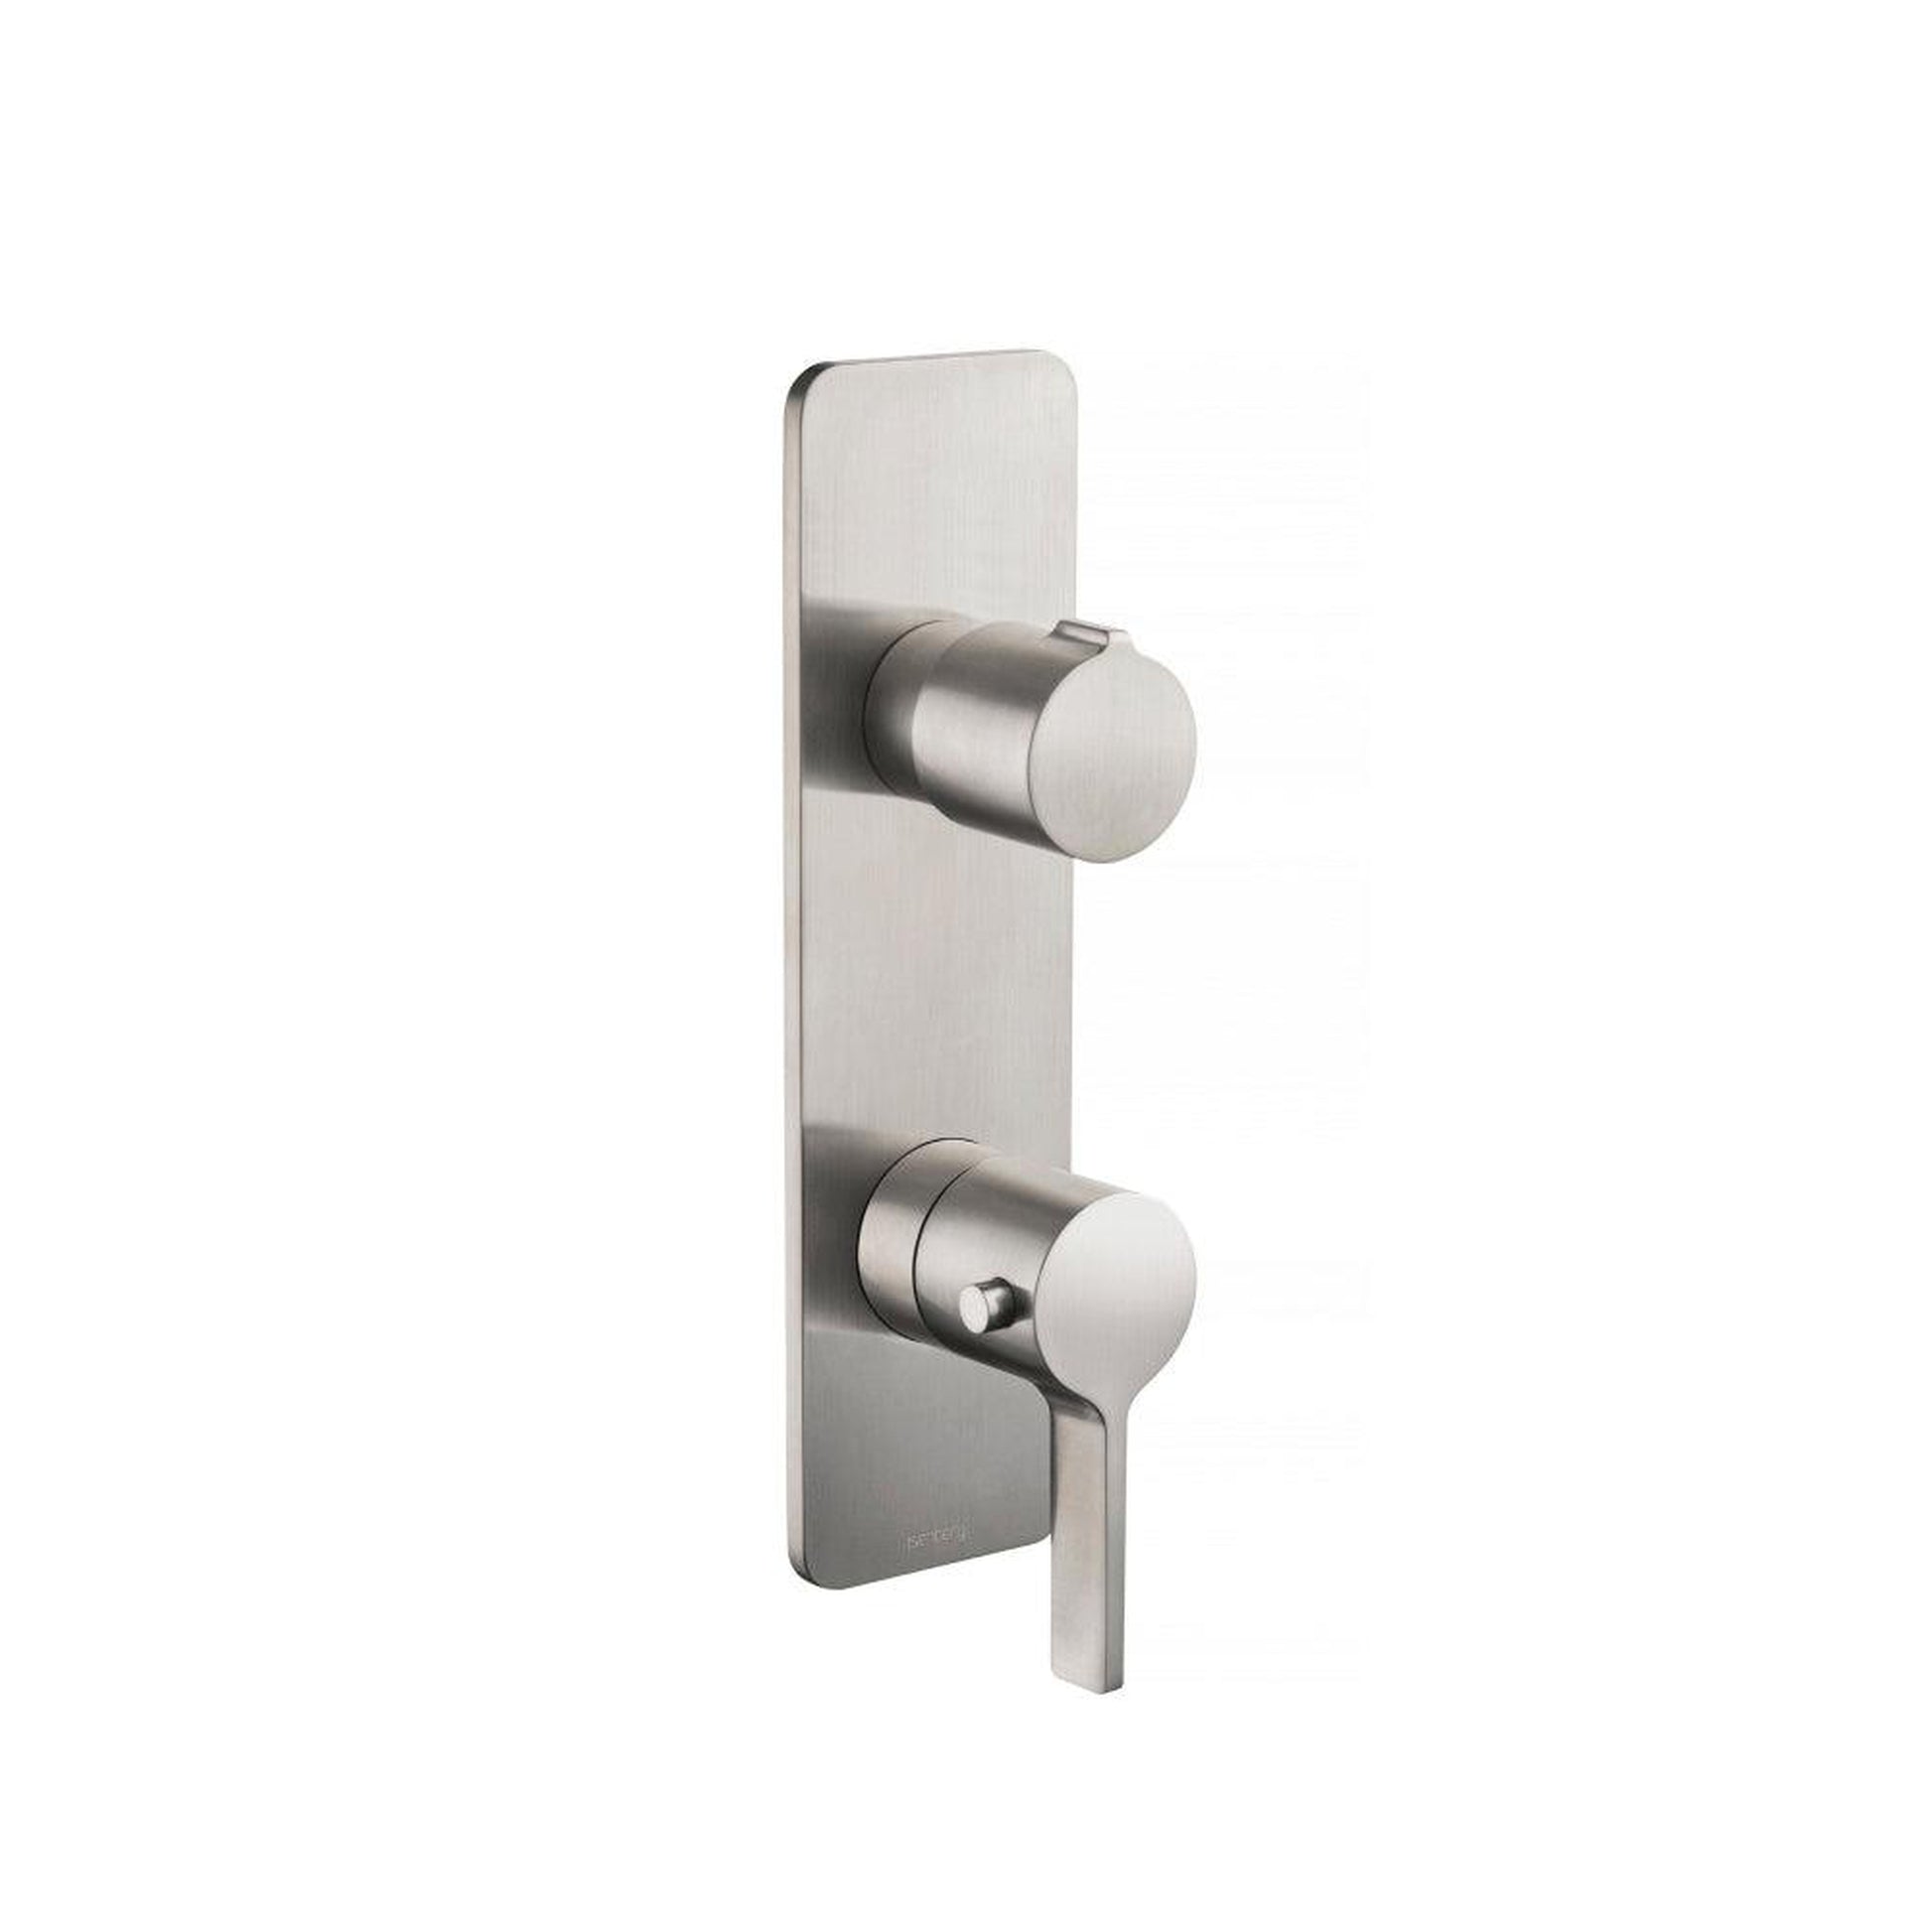 Isenberg Serie 260 3/4" Single Output Horizontal Thermostatic Shower Valve and Trim in Brushed Nickel (260.2720BN)